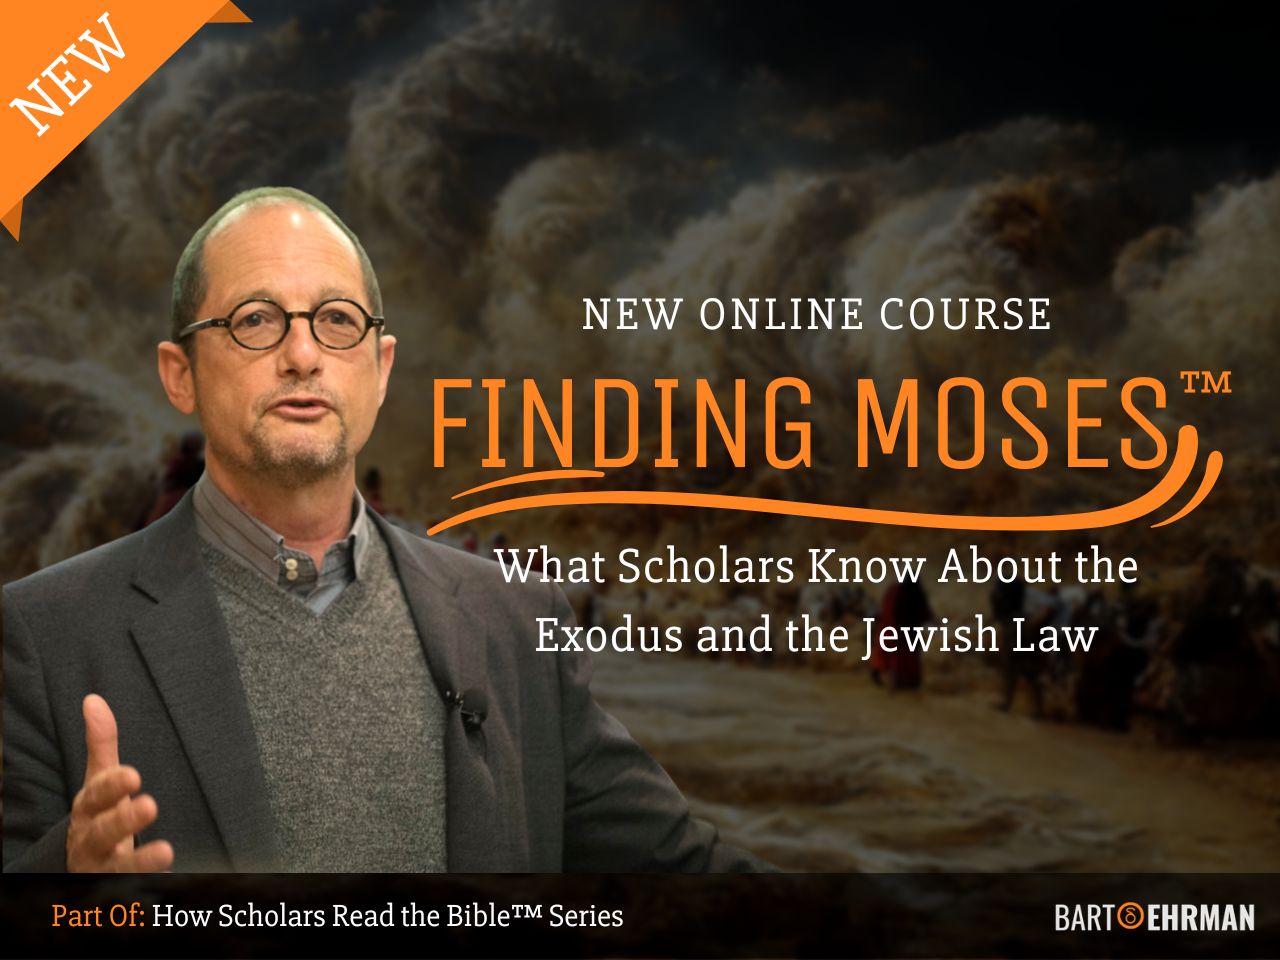 Finding Moses - Online Course by Scholar Bart Ehrman